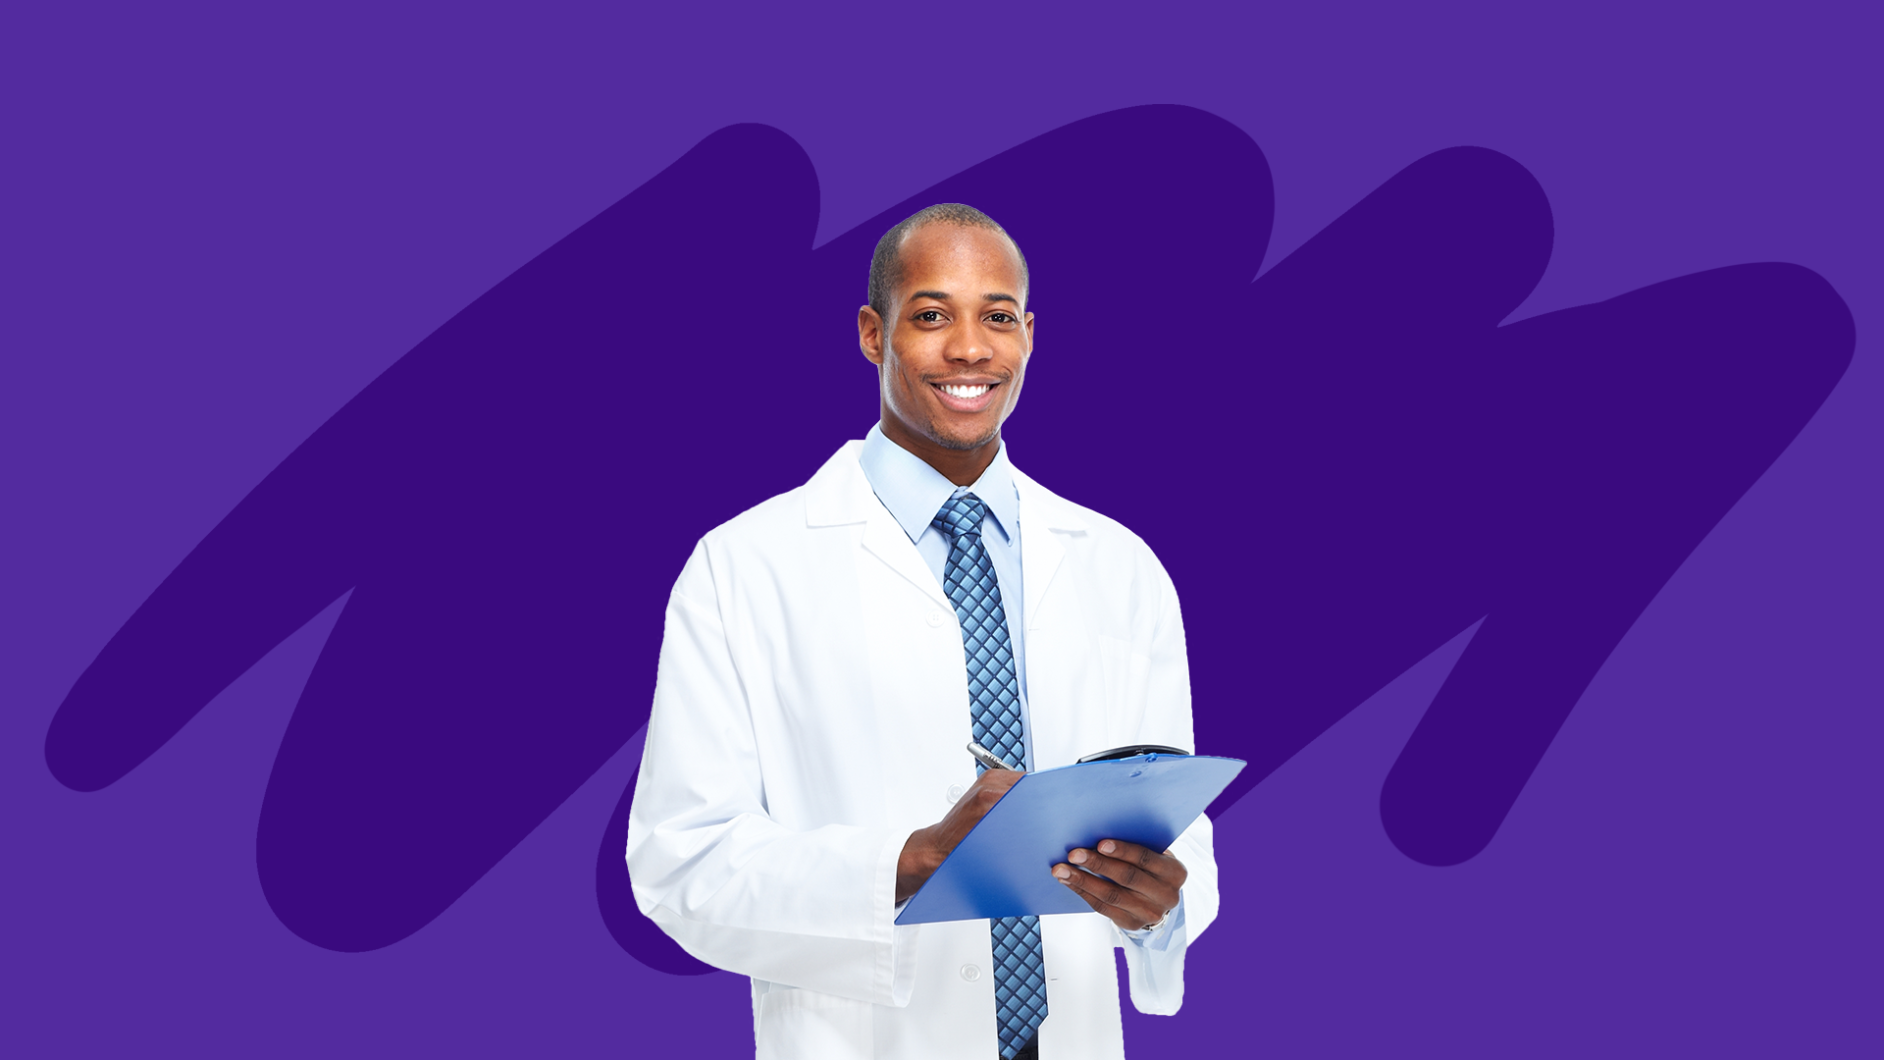 What do pharmacists do? An image of a pharmacist symbolizes an explanation